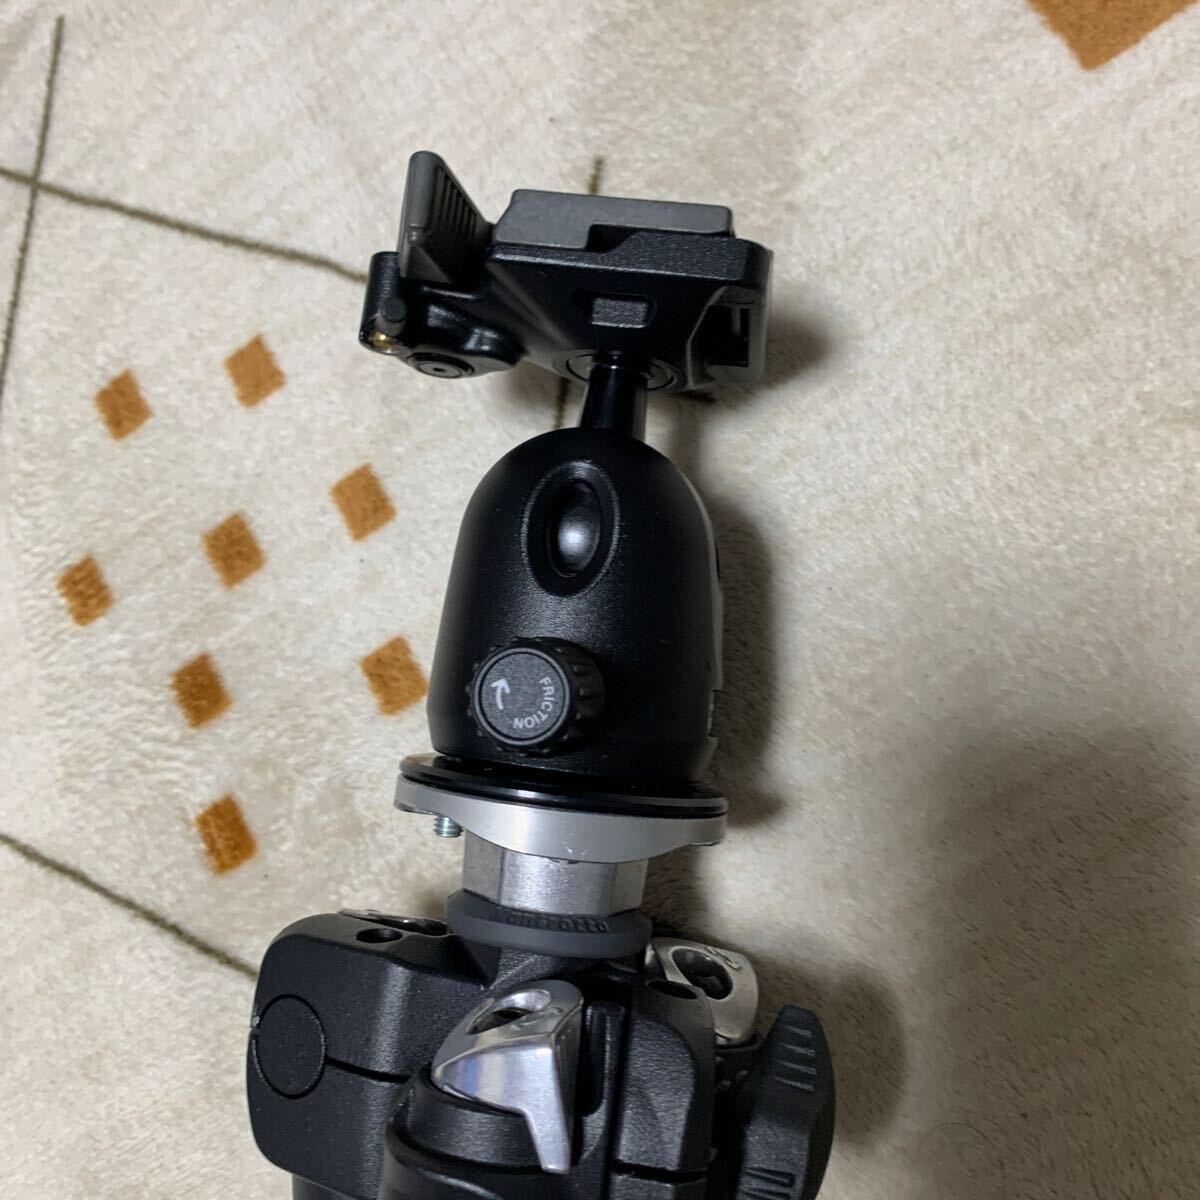 Manfrotto マンフロット 三脚 MT294C3 290 MADE IN ITALY 雲台 496RC2 _画像5